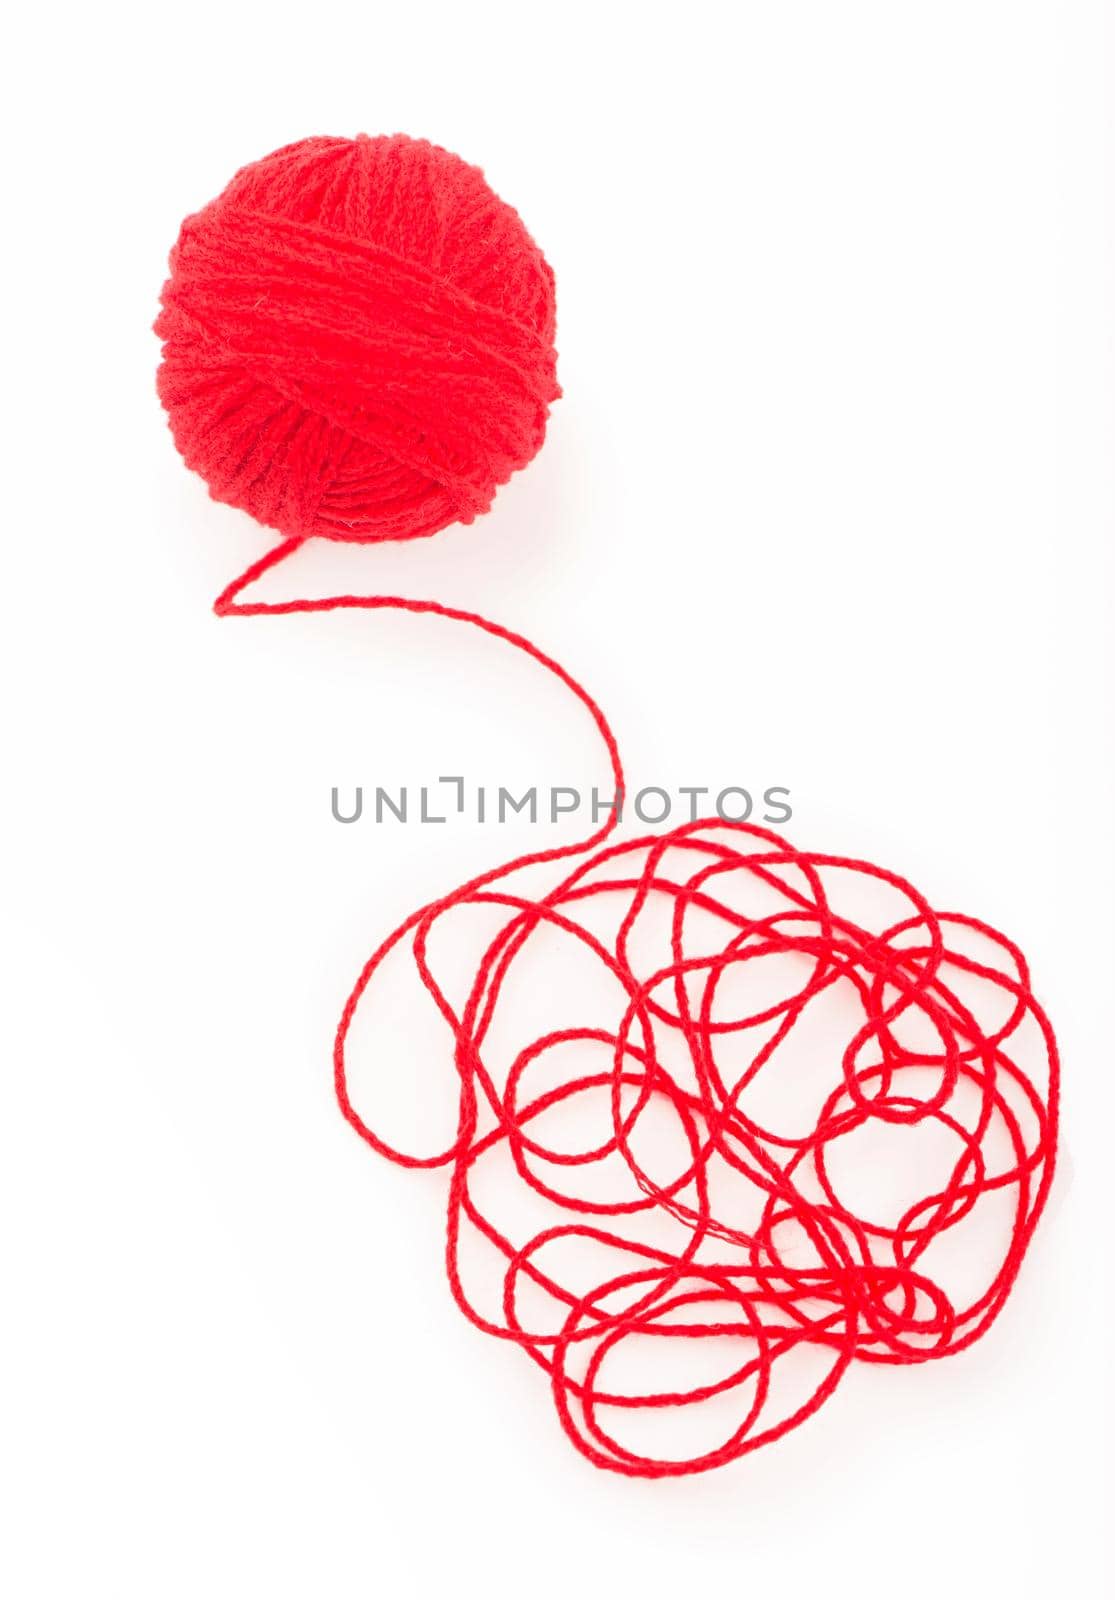 Ball of yarn on the white background by aprilphoto